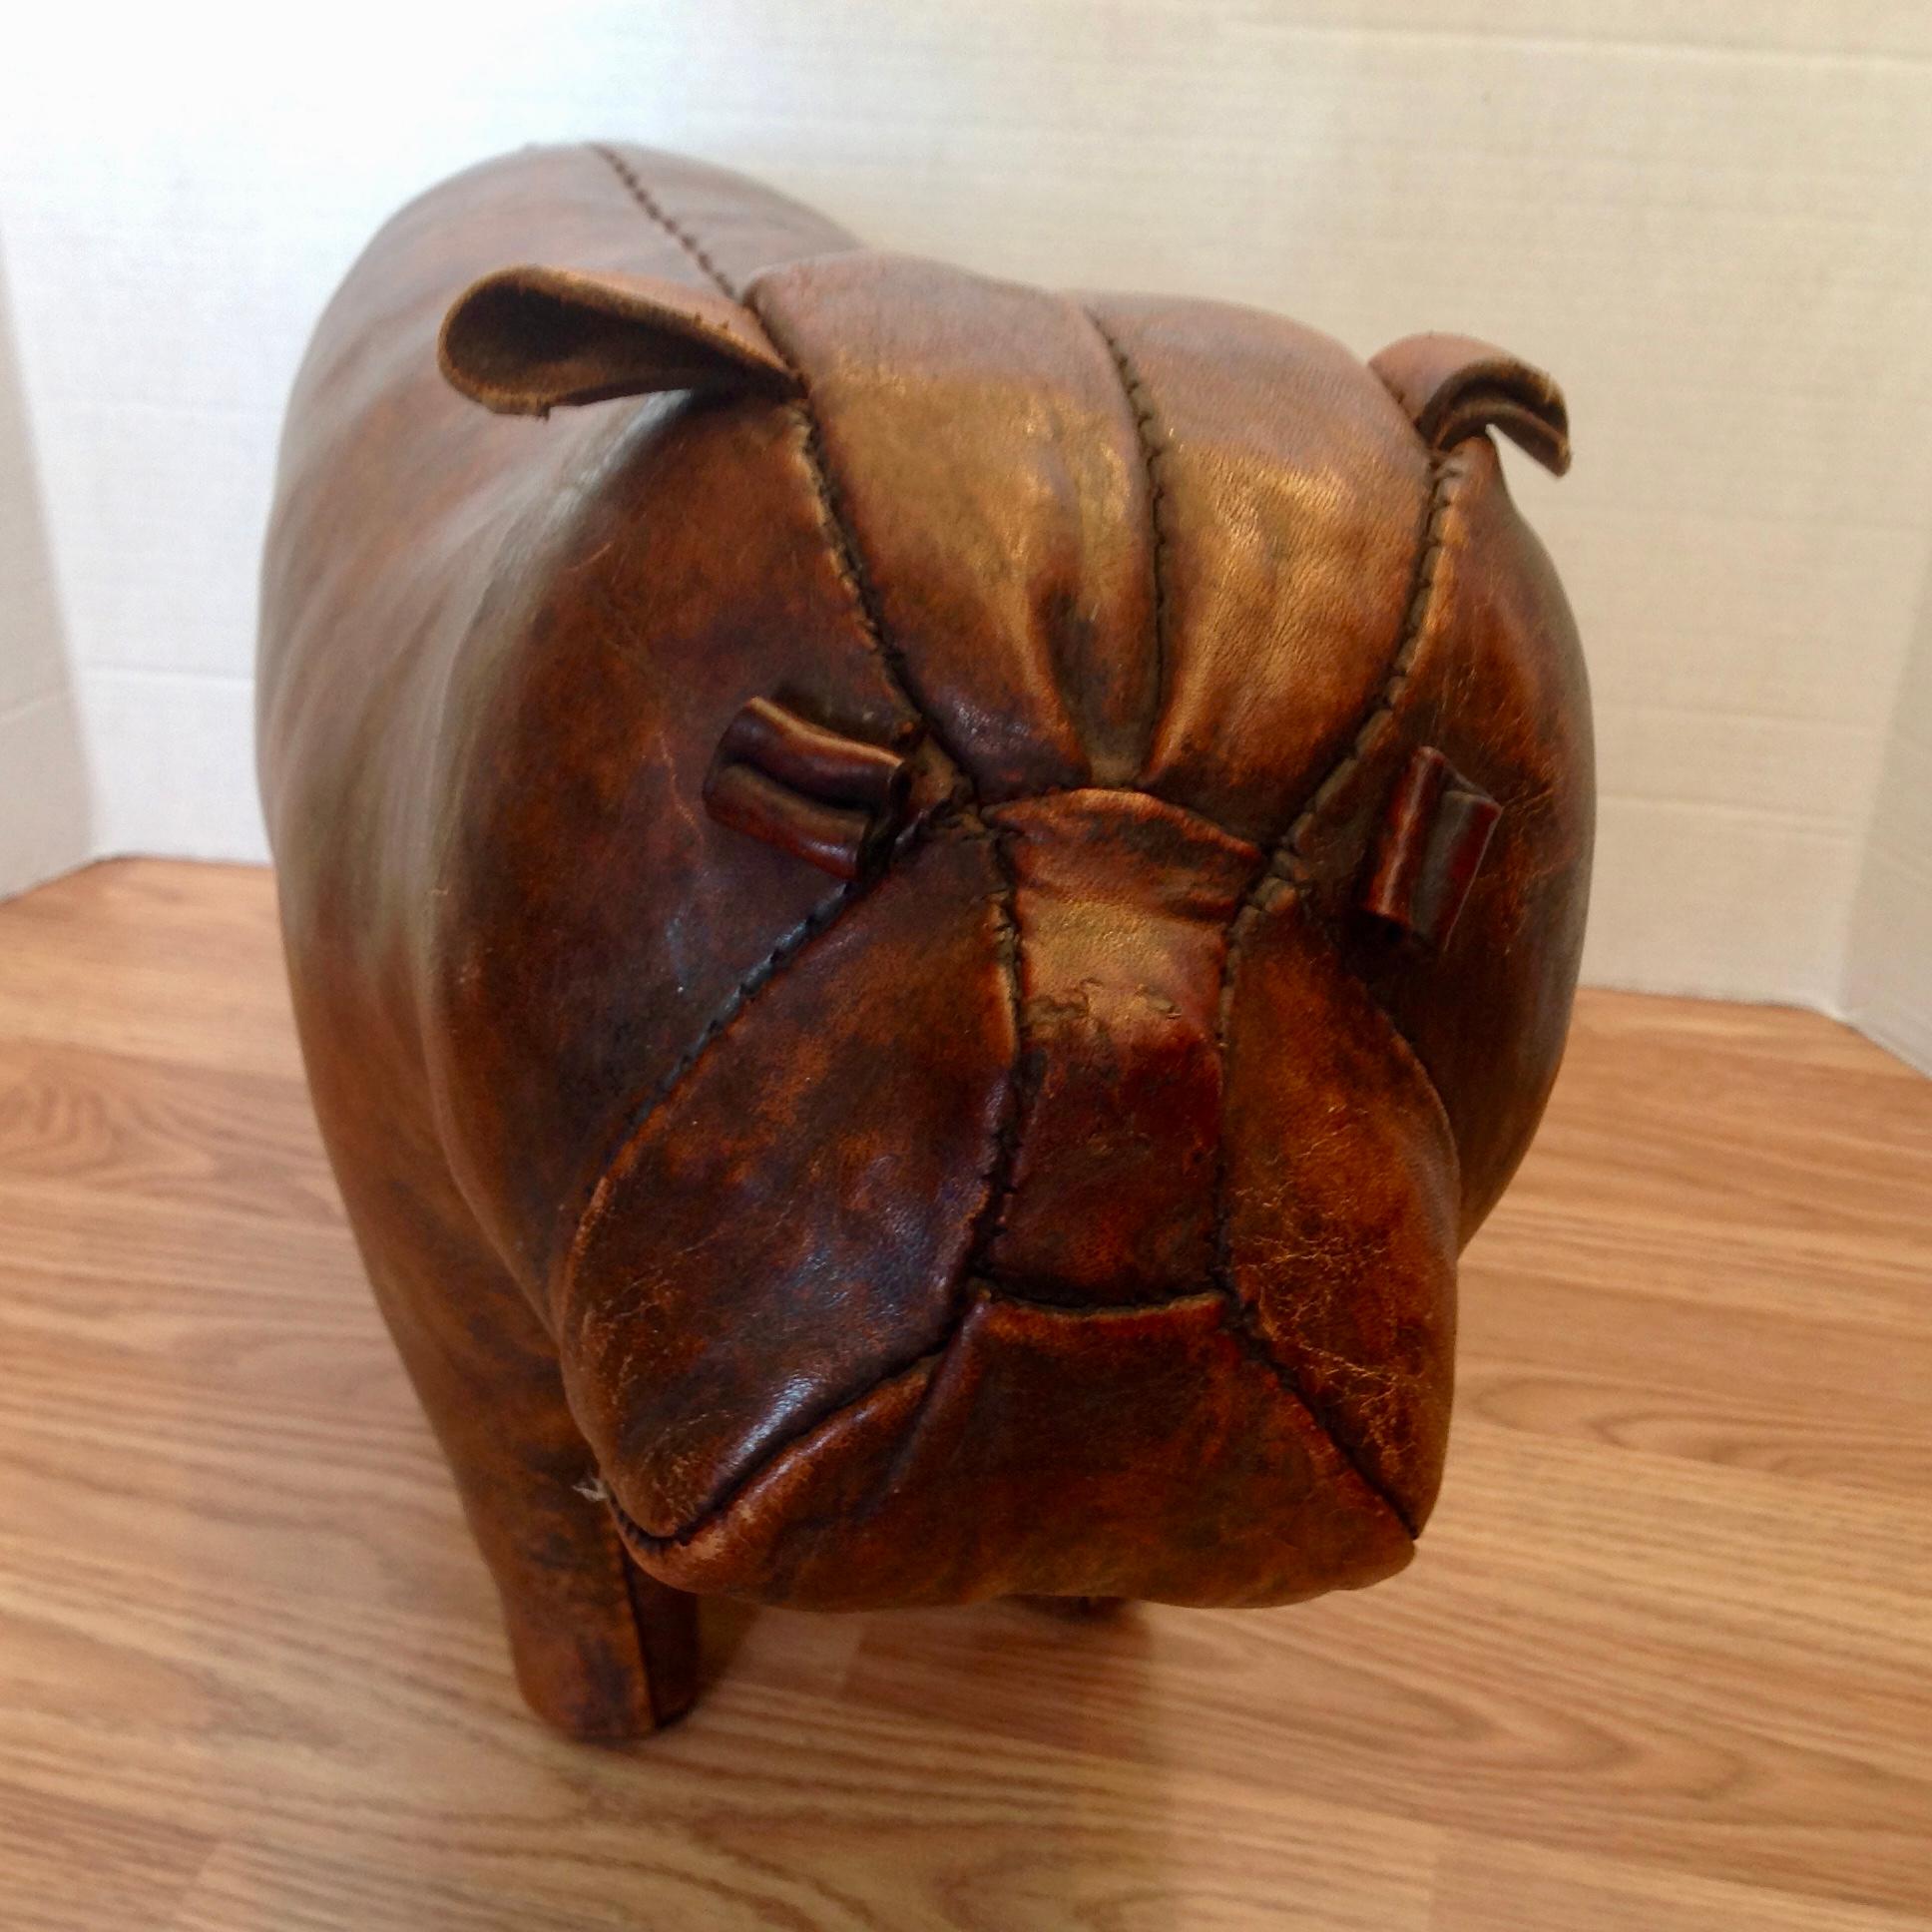 Hand-Crafted Whimsical Abercrombie's Bulldog Foot Rest by Dimitri Omersa